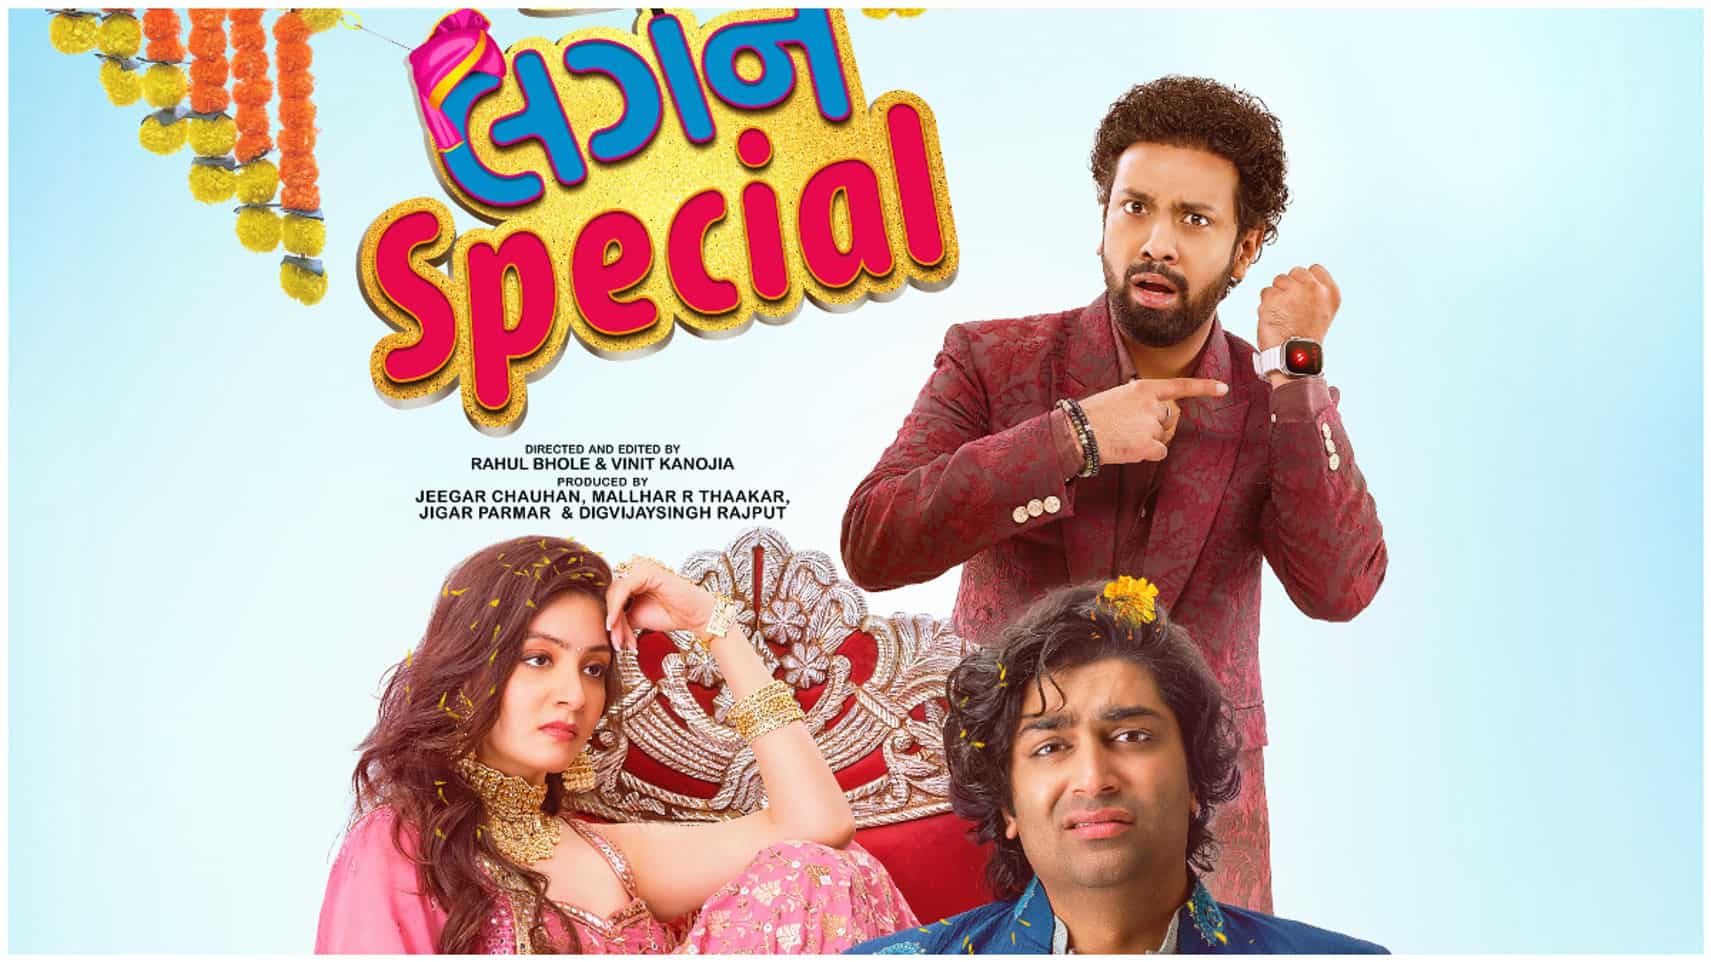 https://www.mobilemasala.com/movies/Lagan-Special---Heres-why-you-should-watch-this-Gujarati-film-on-OTT-i273253